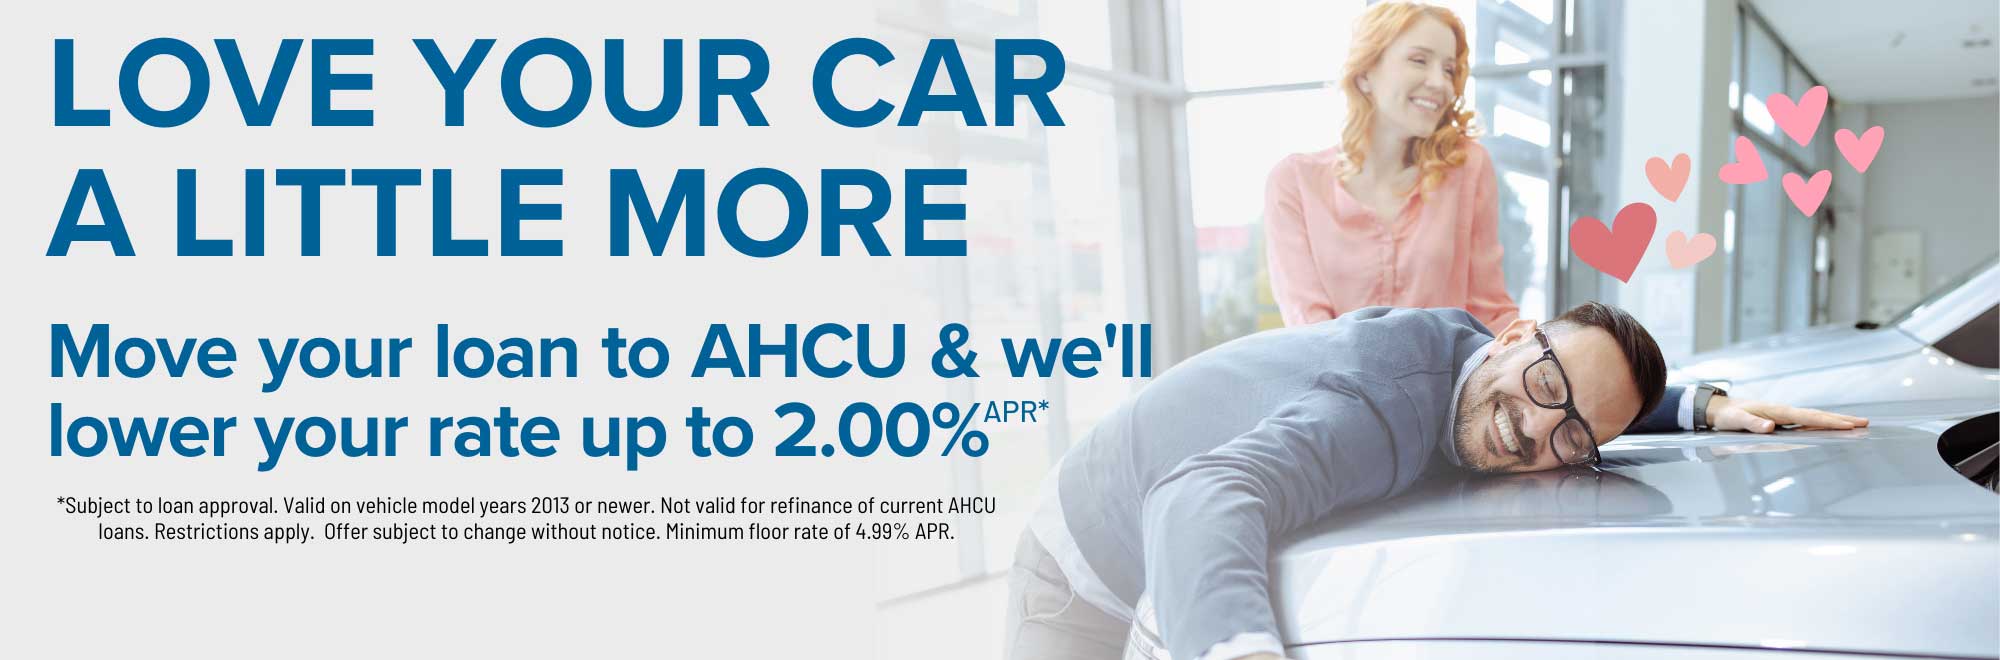 Move your loan to AHCU and we'll beat your current rate by up to 2.00% APR. Subject to approval. Models 2013 or newer. Restrictions apply. Minimum floor rate 4.99% APR.